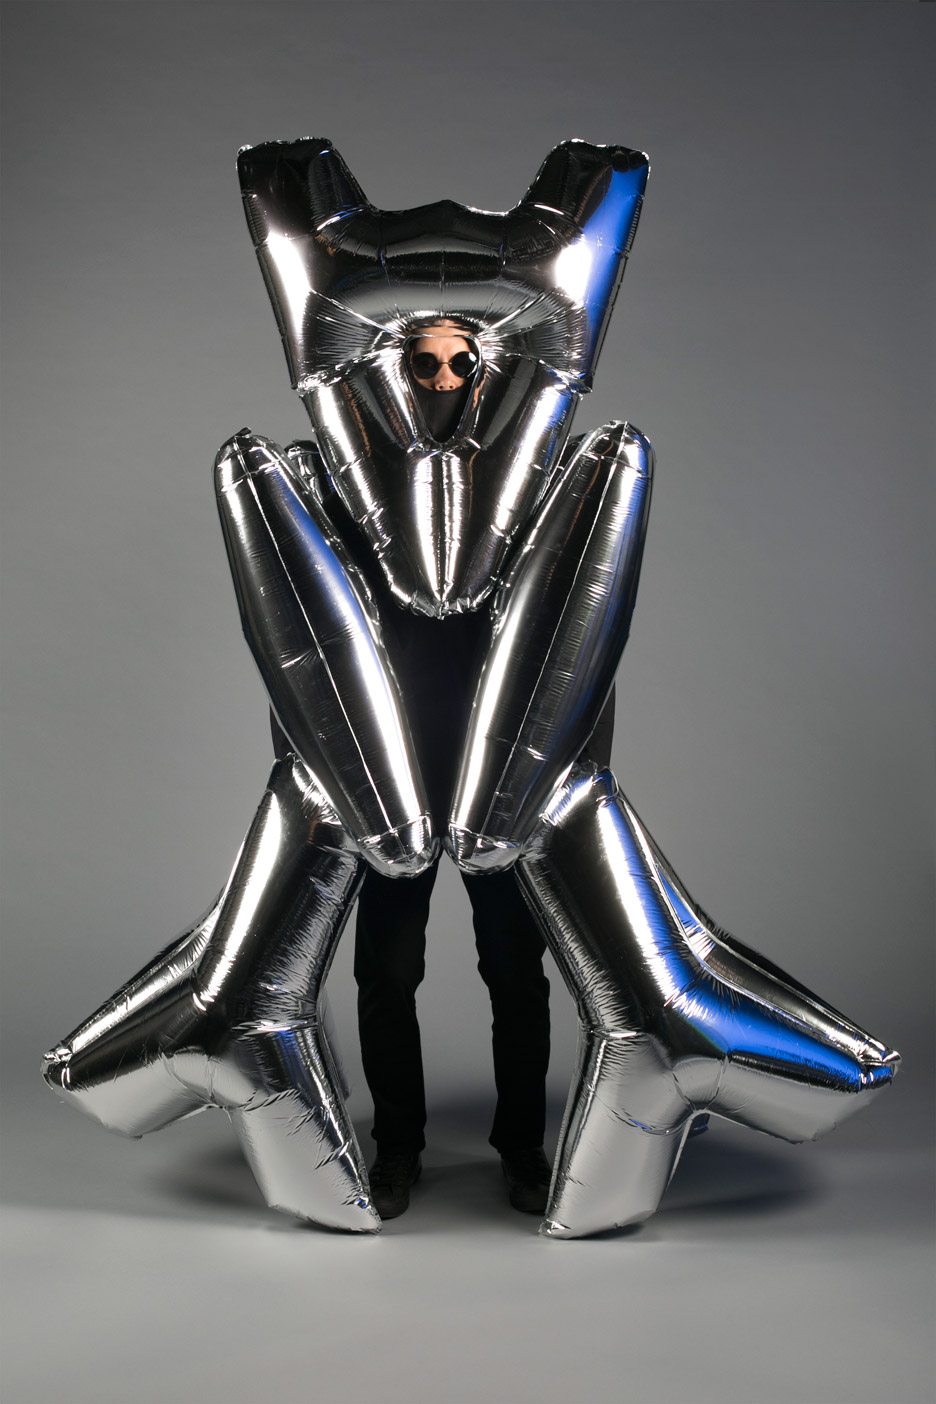 Ken Tanabe Creates Halloween Costumes From Helium Balloons And Old CDs